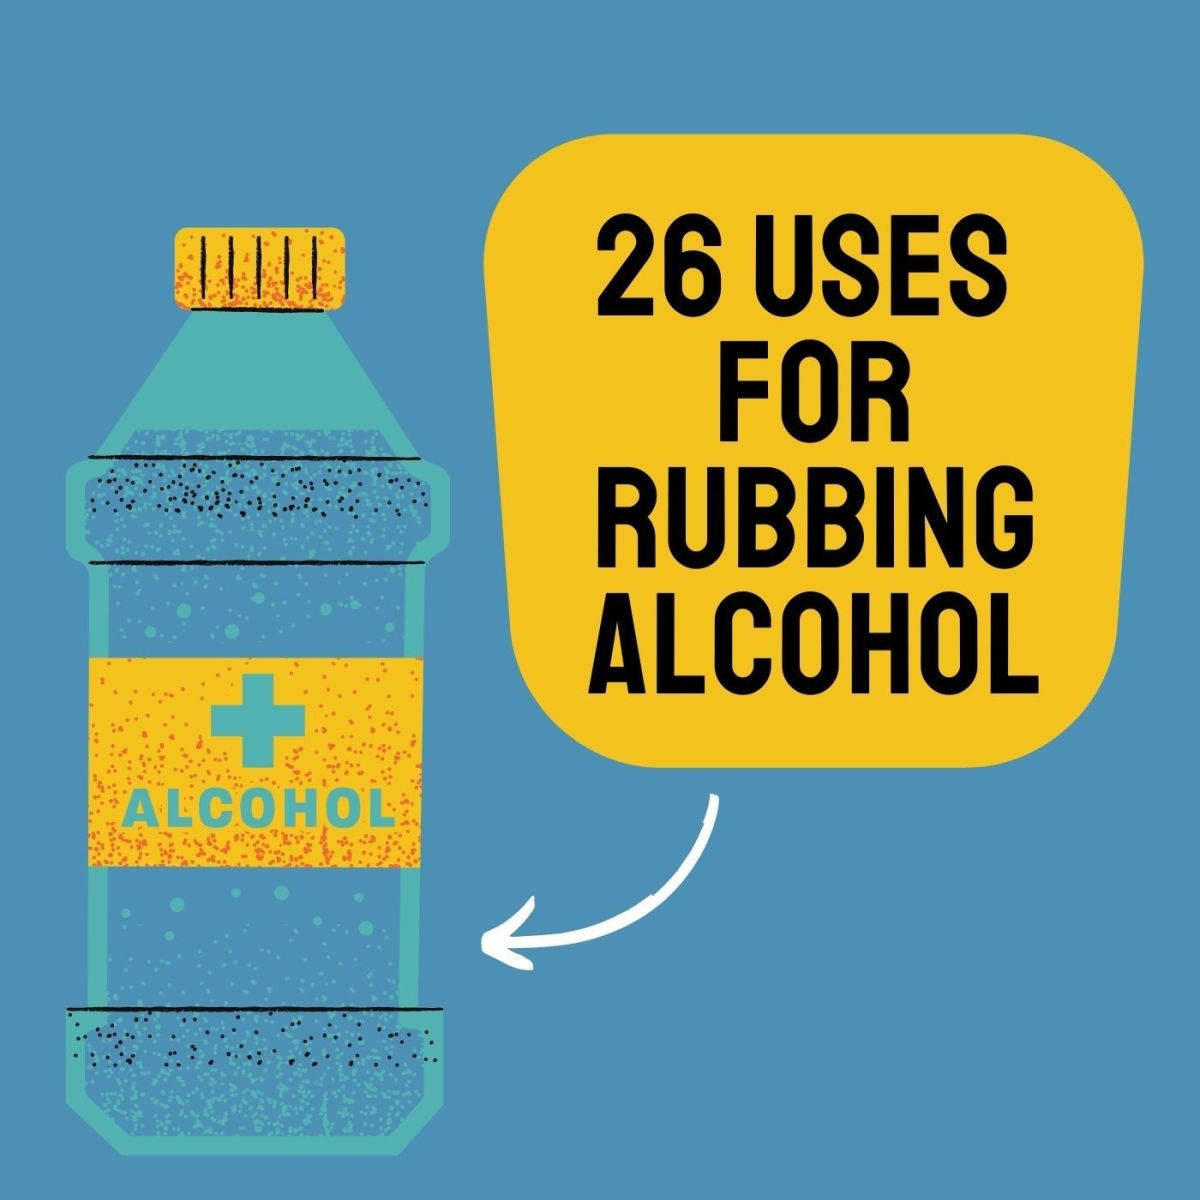 26 Uses for Rubbing Alcohol